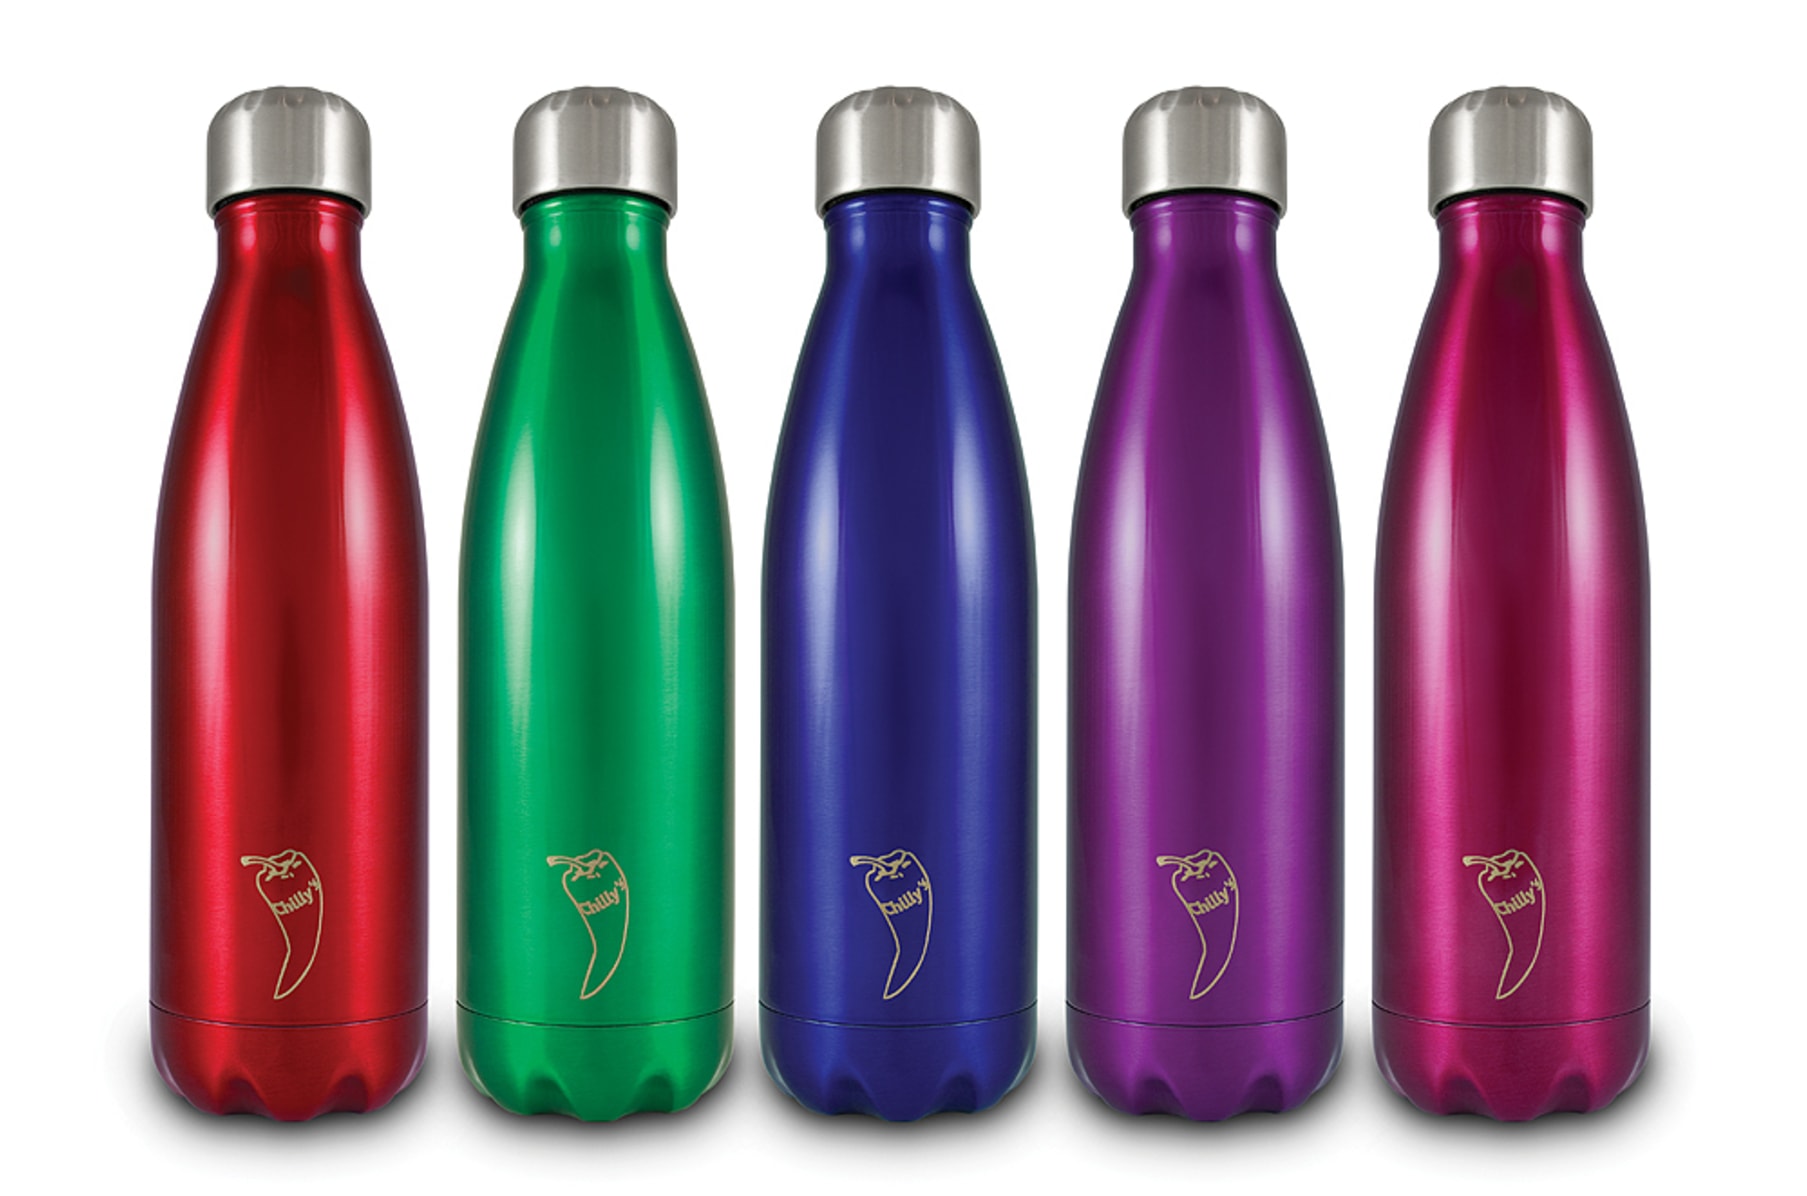 Chilly's bottle • Compare (4 products) see prices »